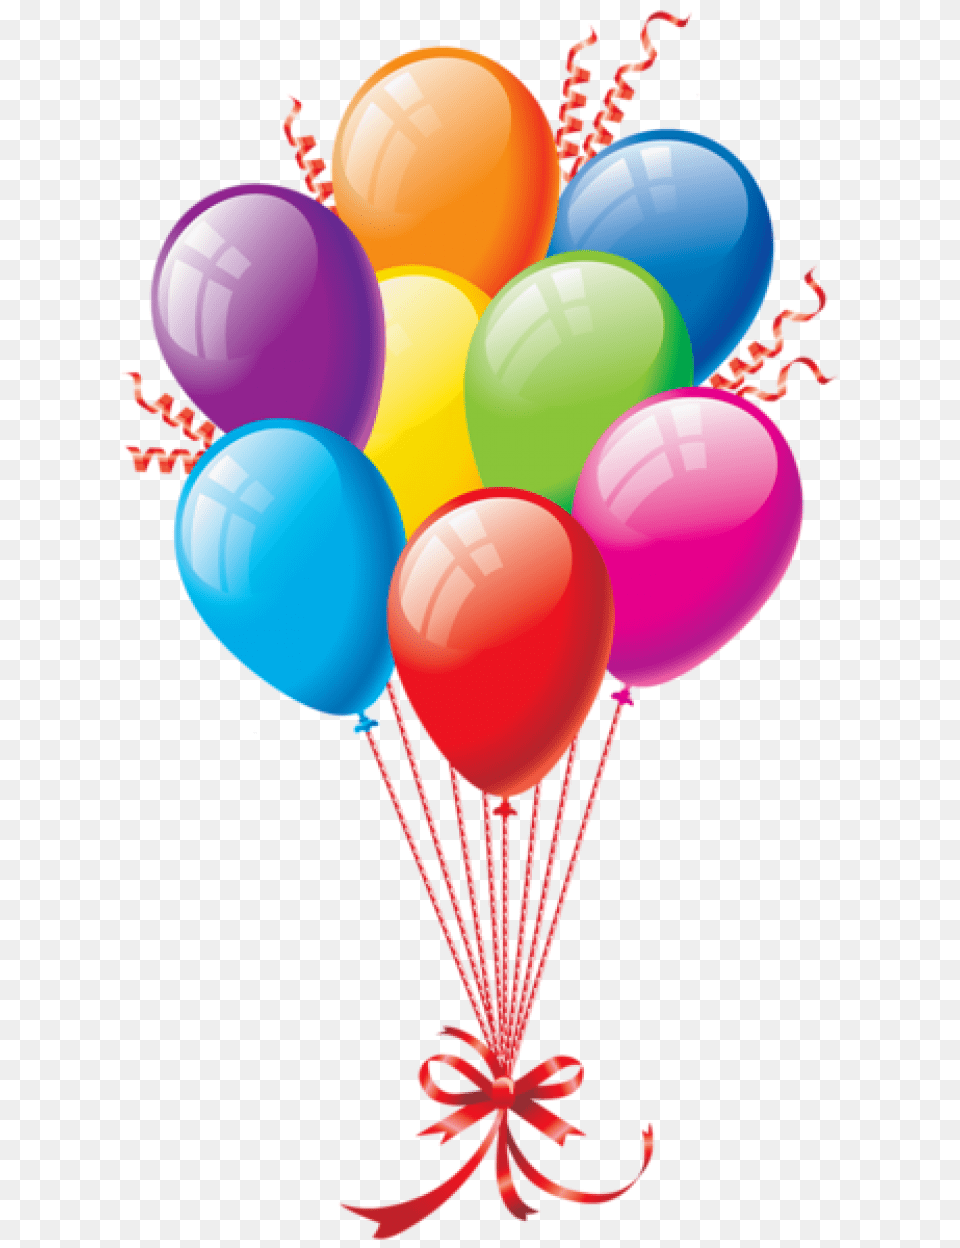 Free Clipart Download Simple Design Clipart Free Download, Balloon Png Image